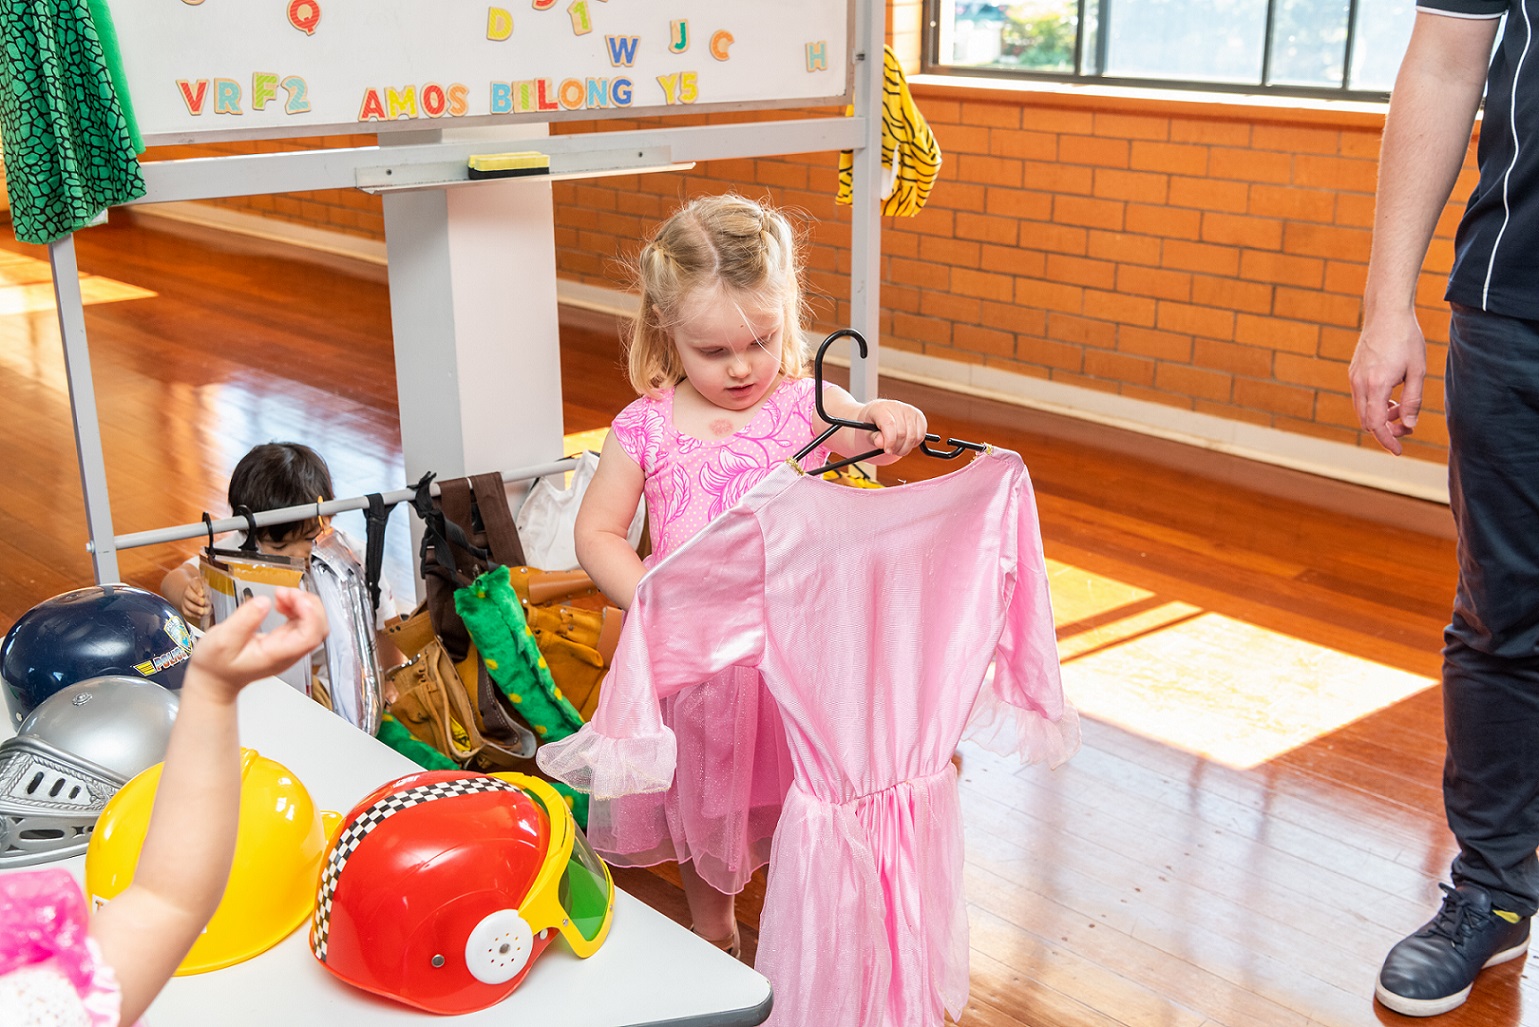 Child preparing for imaginative play by selecting a costume from playgroup dress up box.